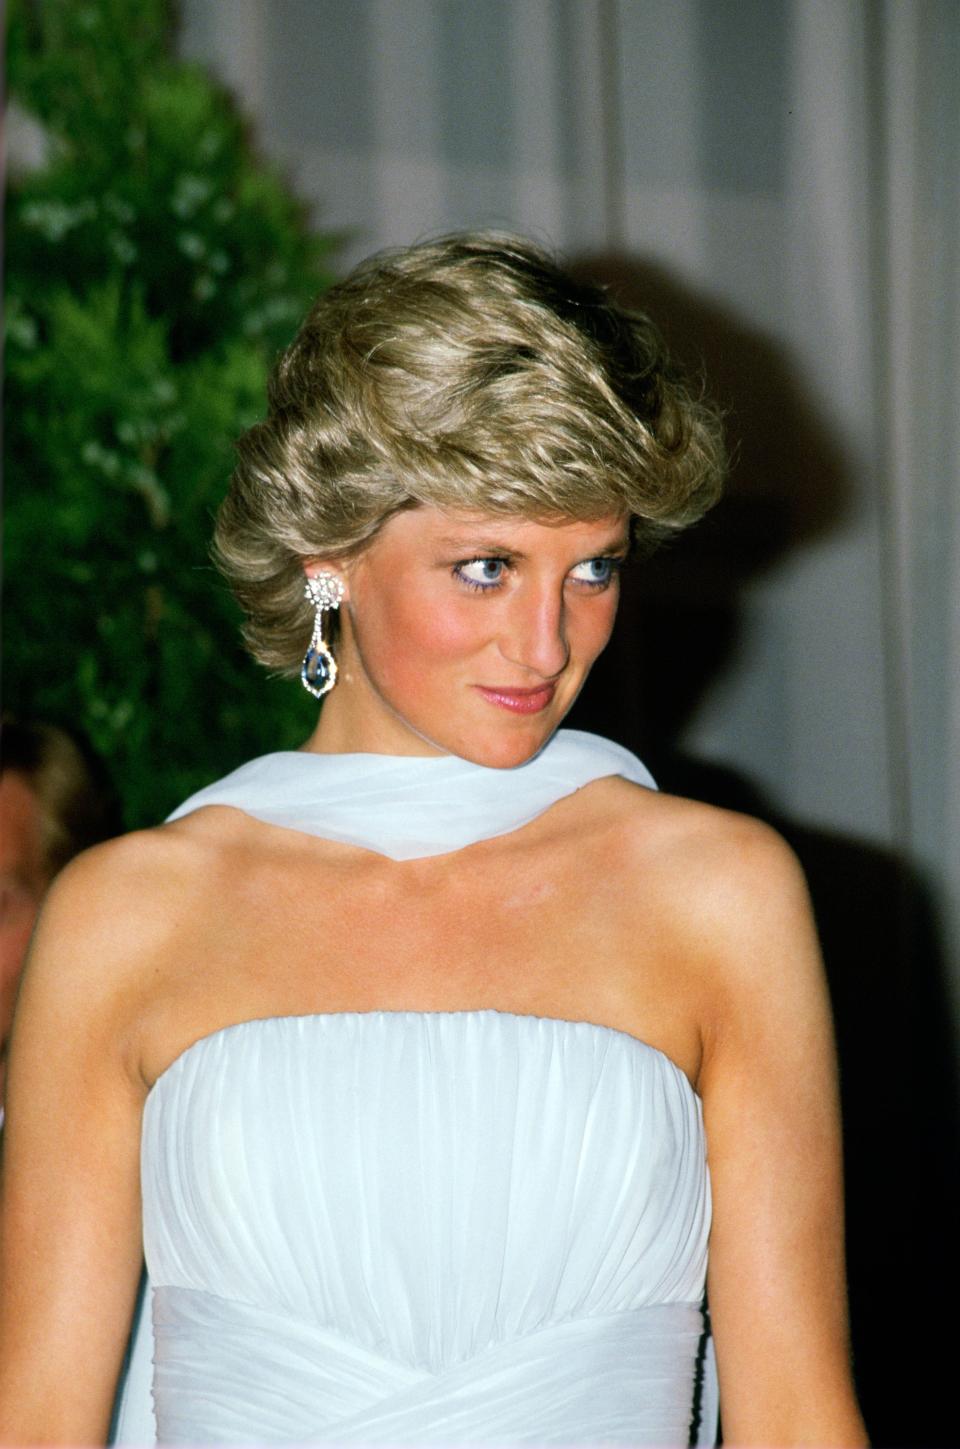 7 beauty products worn by Princess Diana